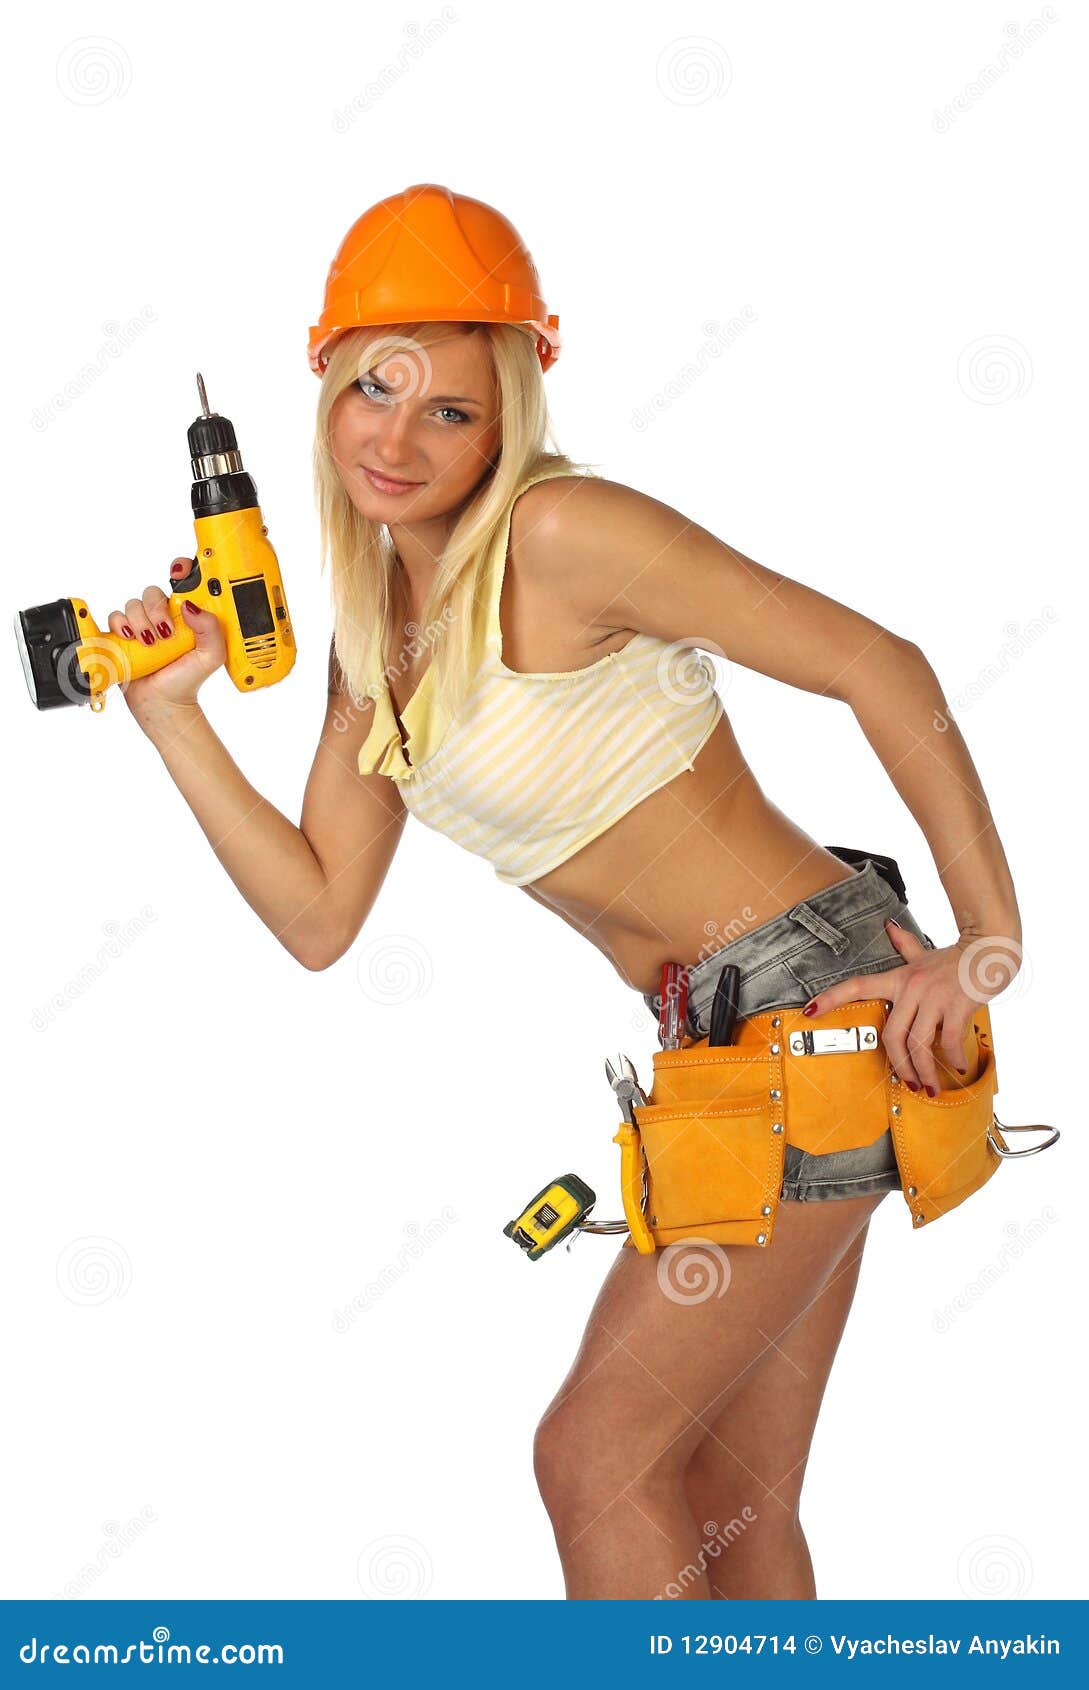 dave satterfield recommends Hot Female Construction Worker